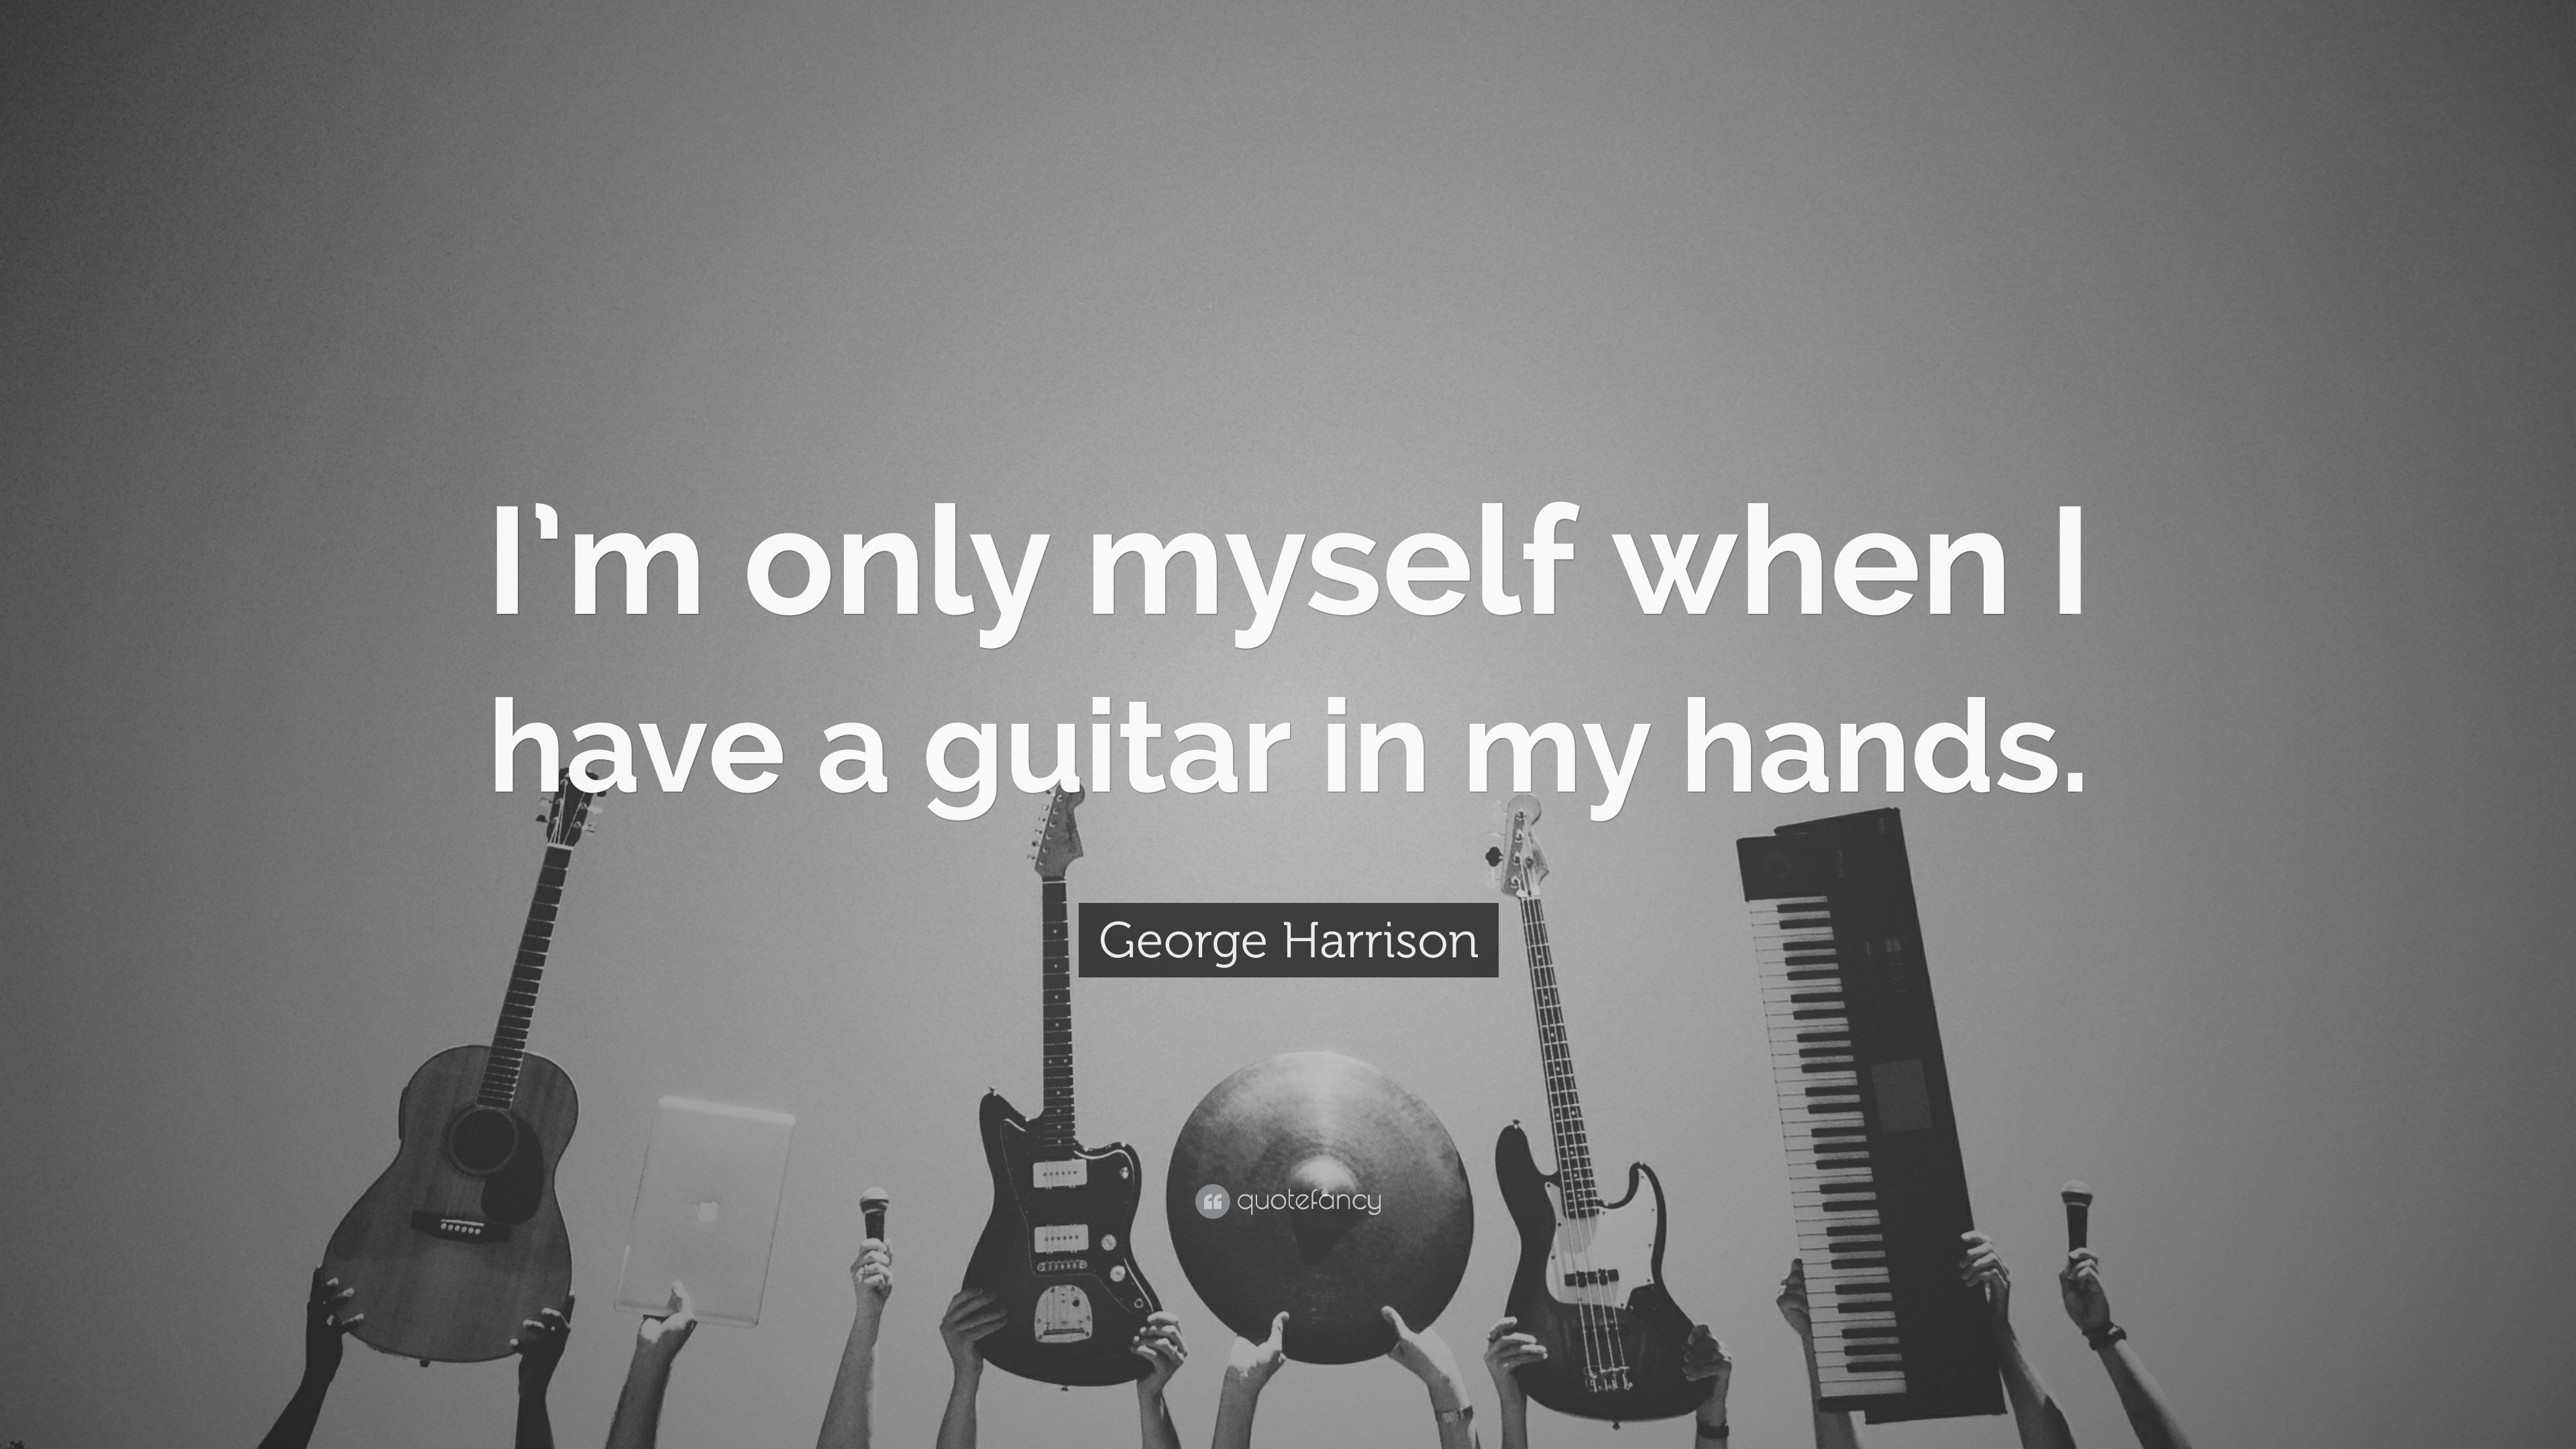 3840x2160 George Harrison Quote: “I'm only myself when I have a guitar in